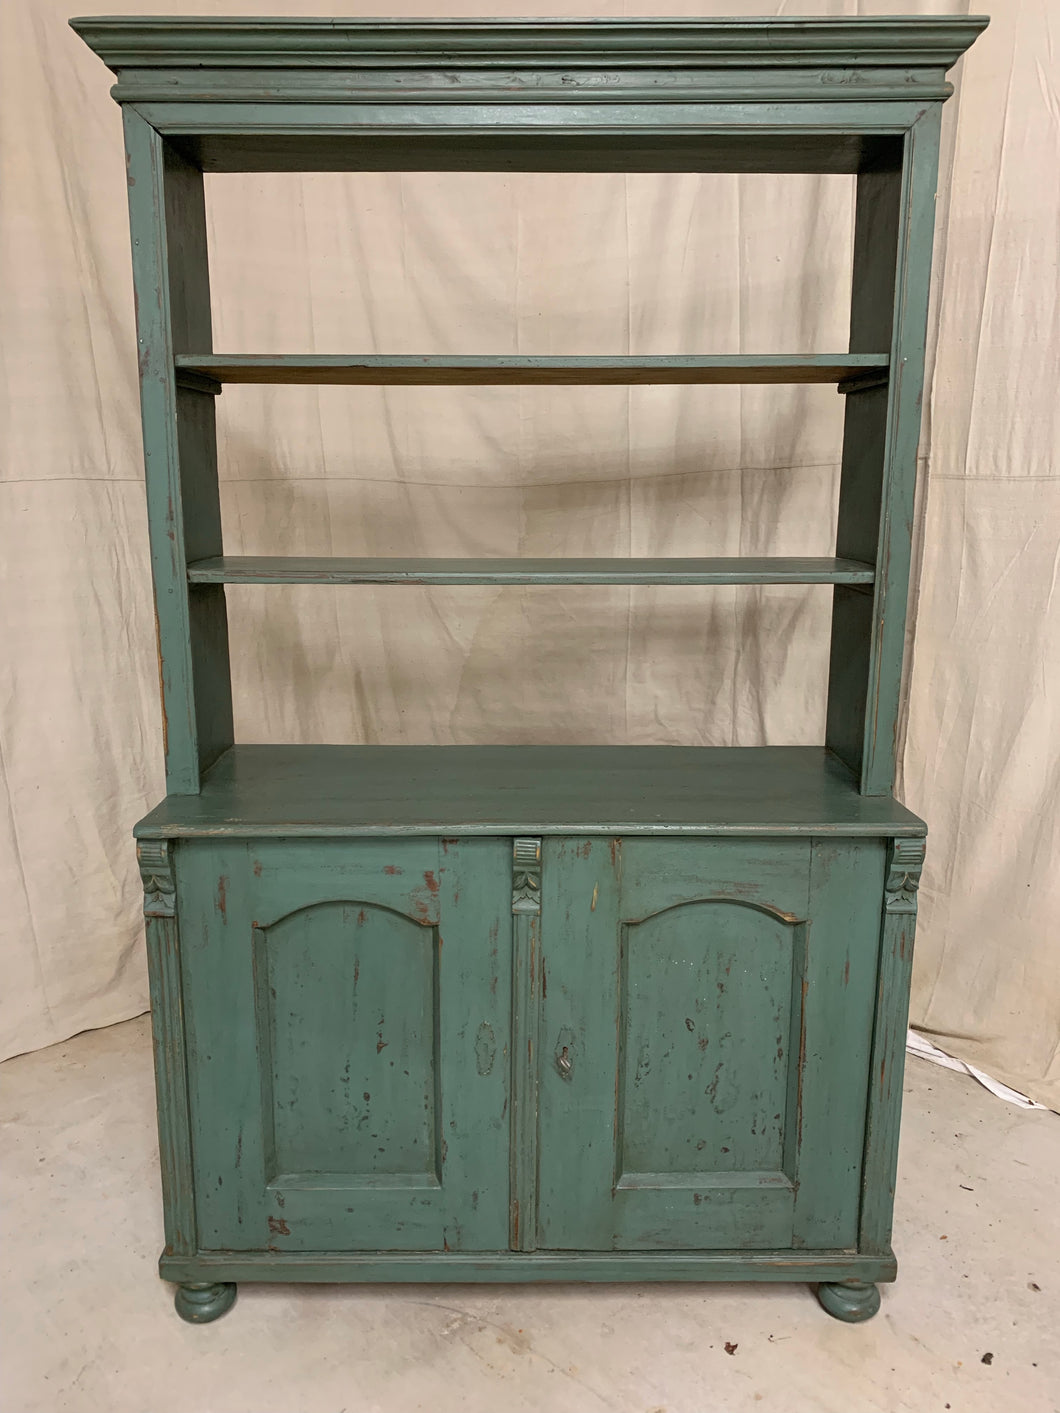 Antique Pine Cabinet with Shelves